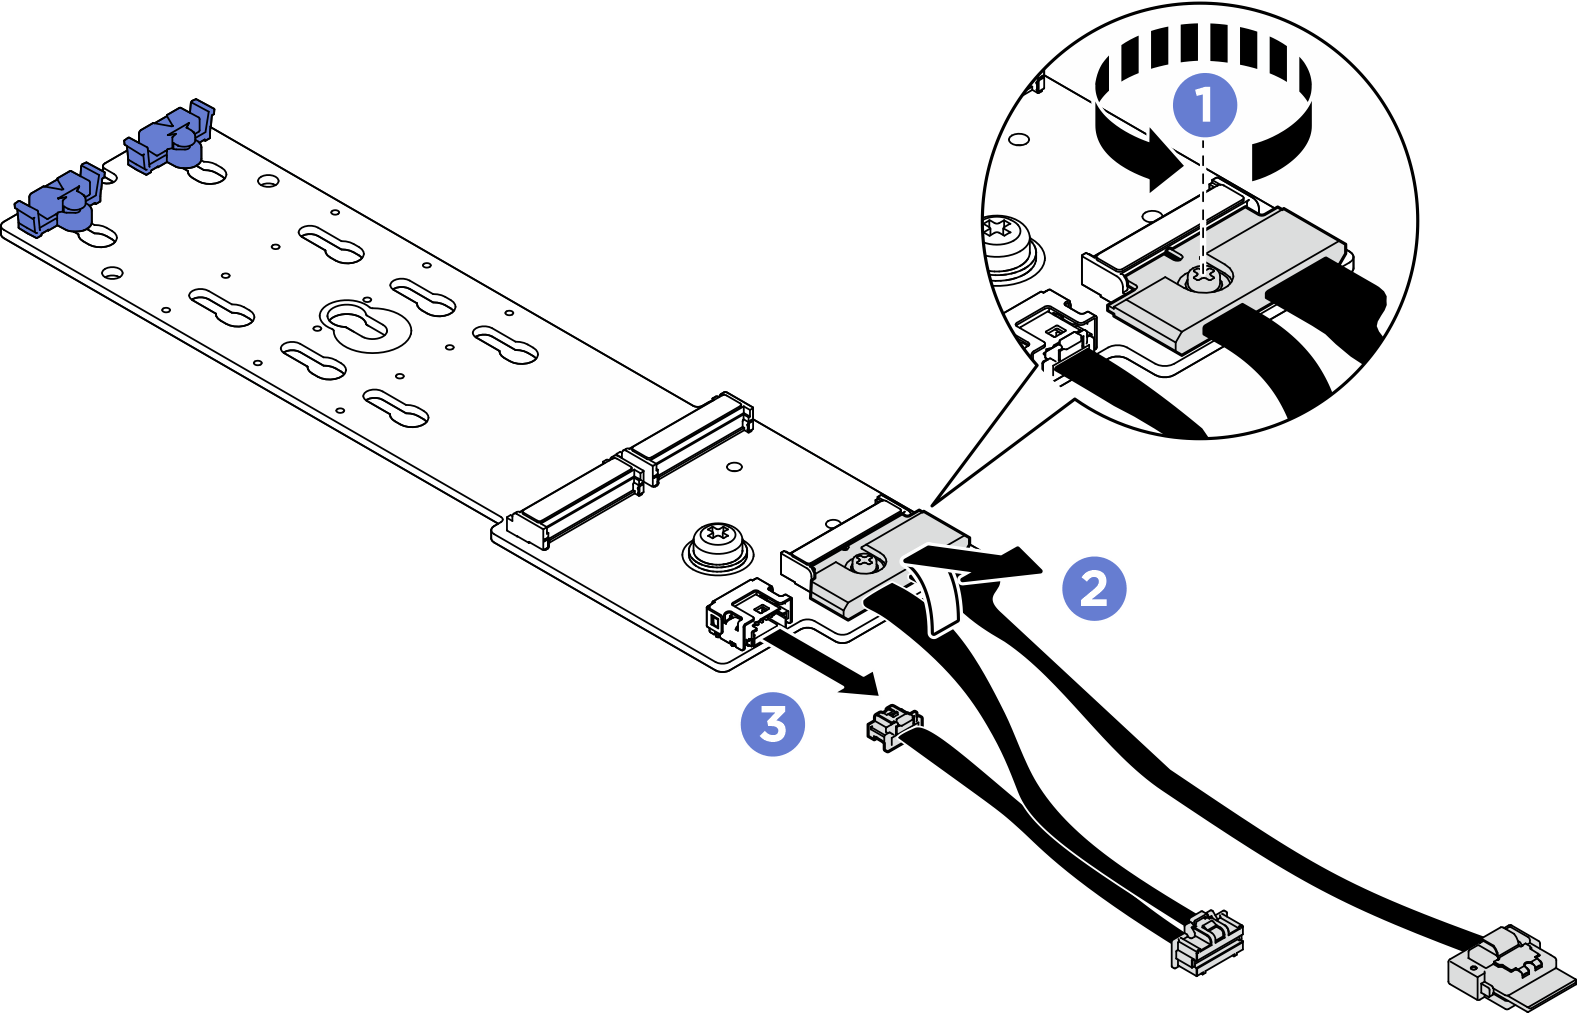 RAID M.2 backplane cable disconnection